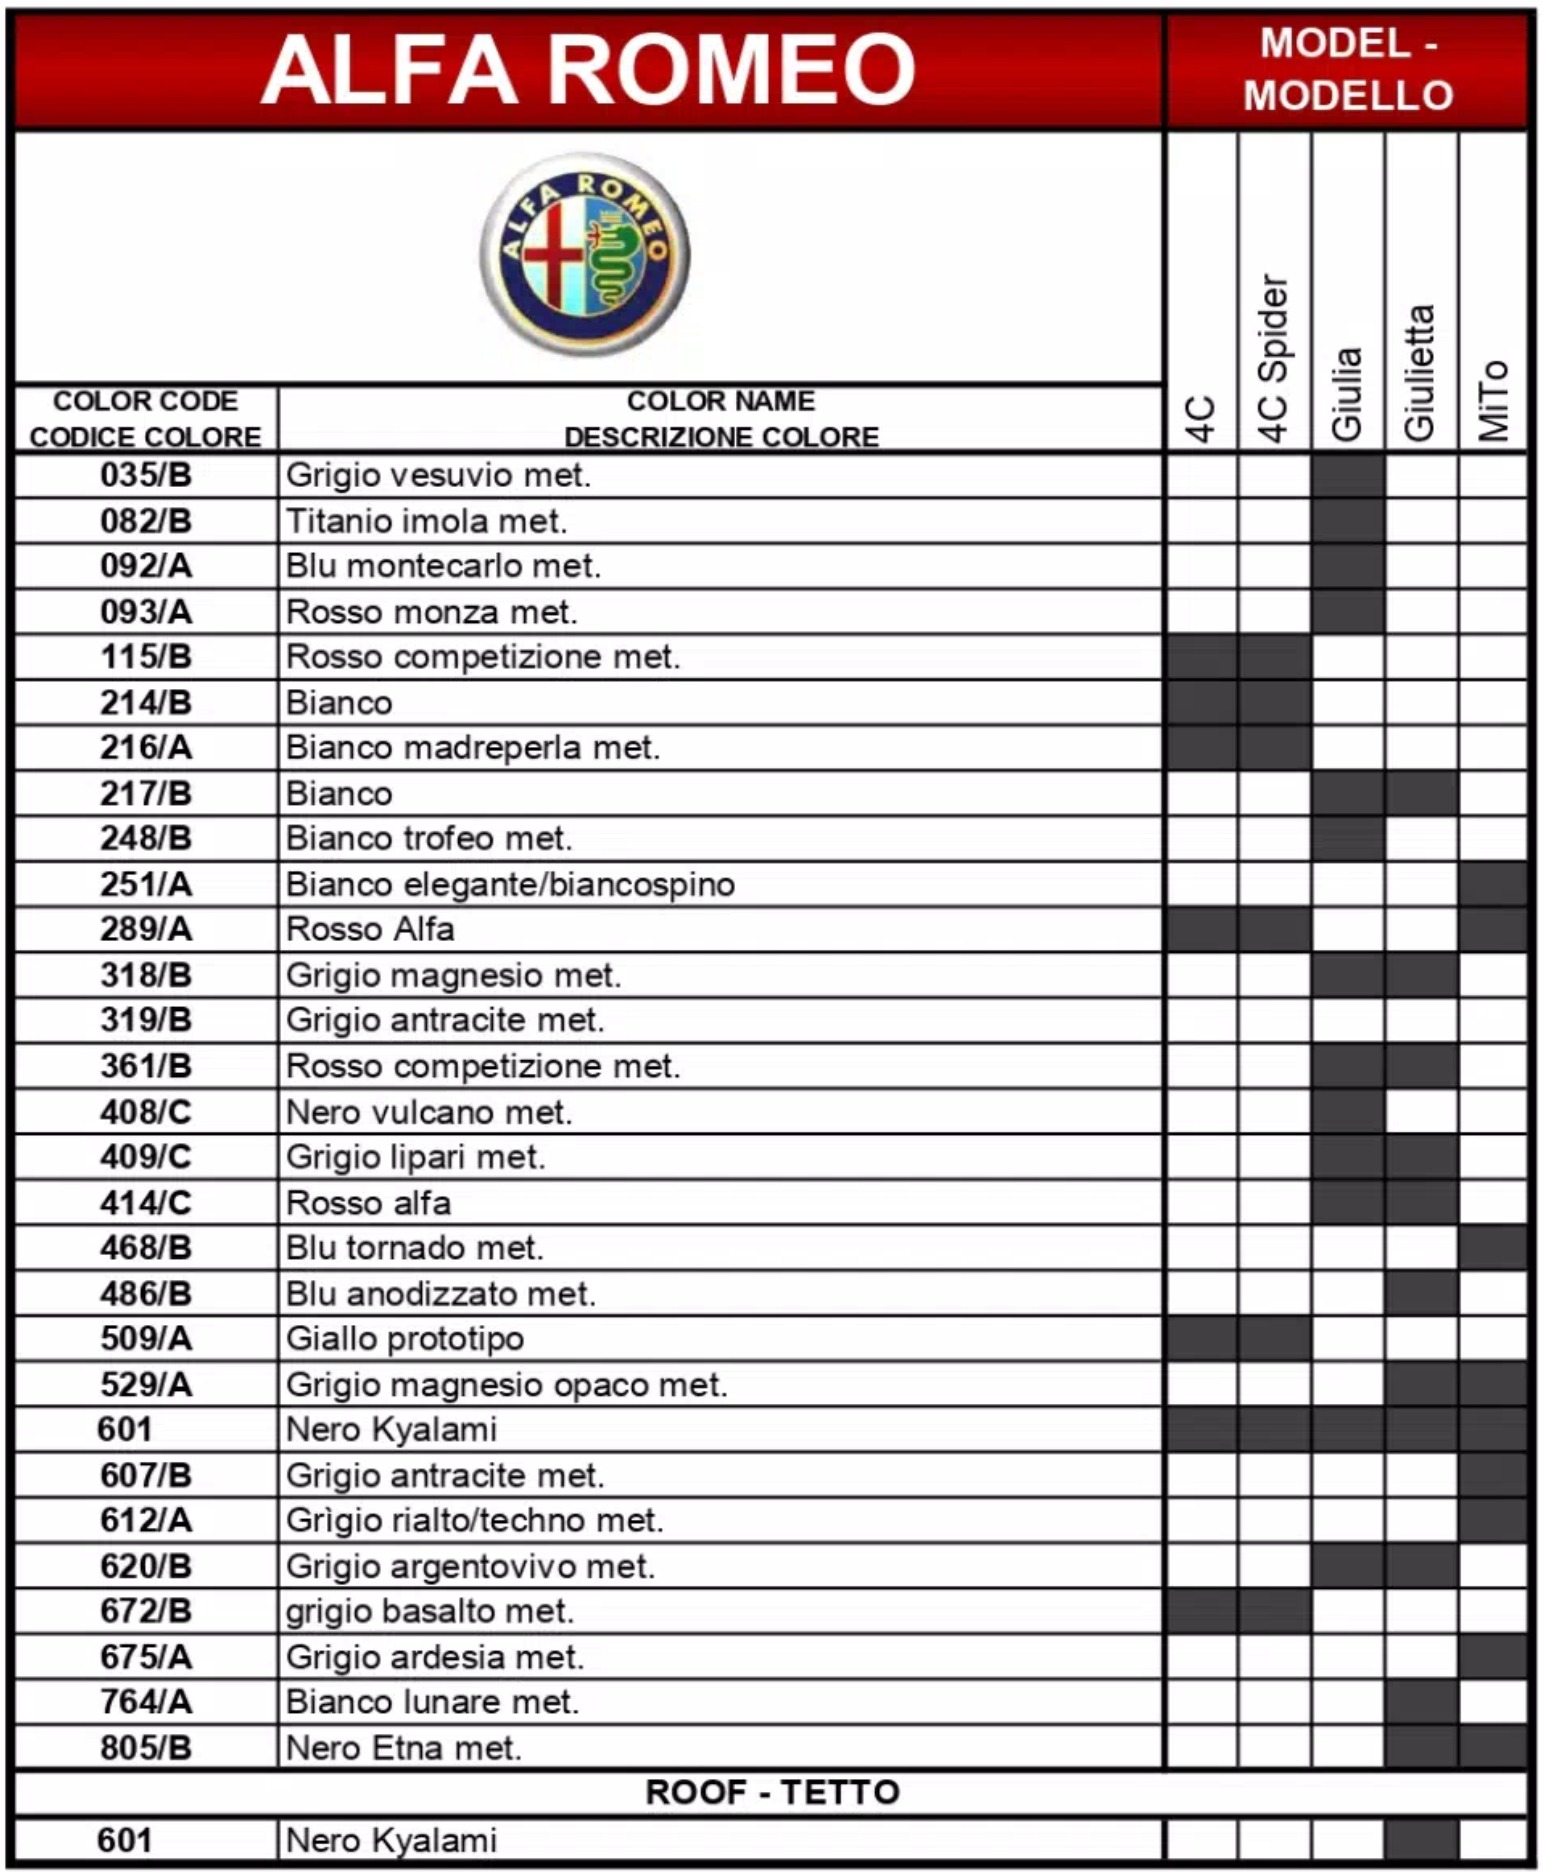 paint codes and color names to the vehicle they went to for 2017 Alfa Romeo Vehicles